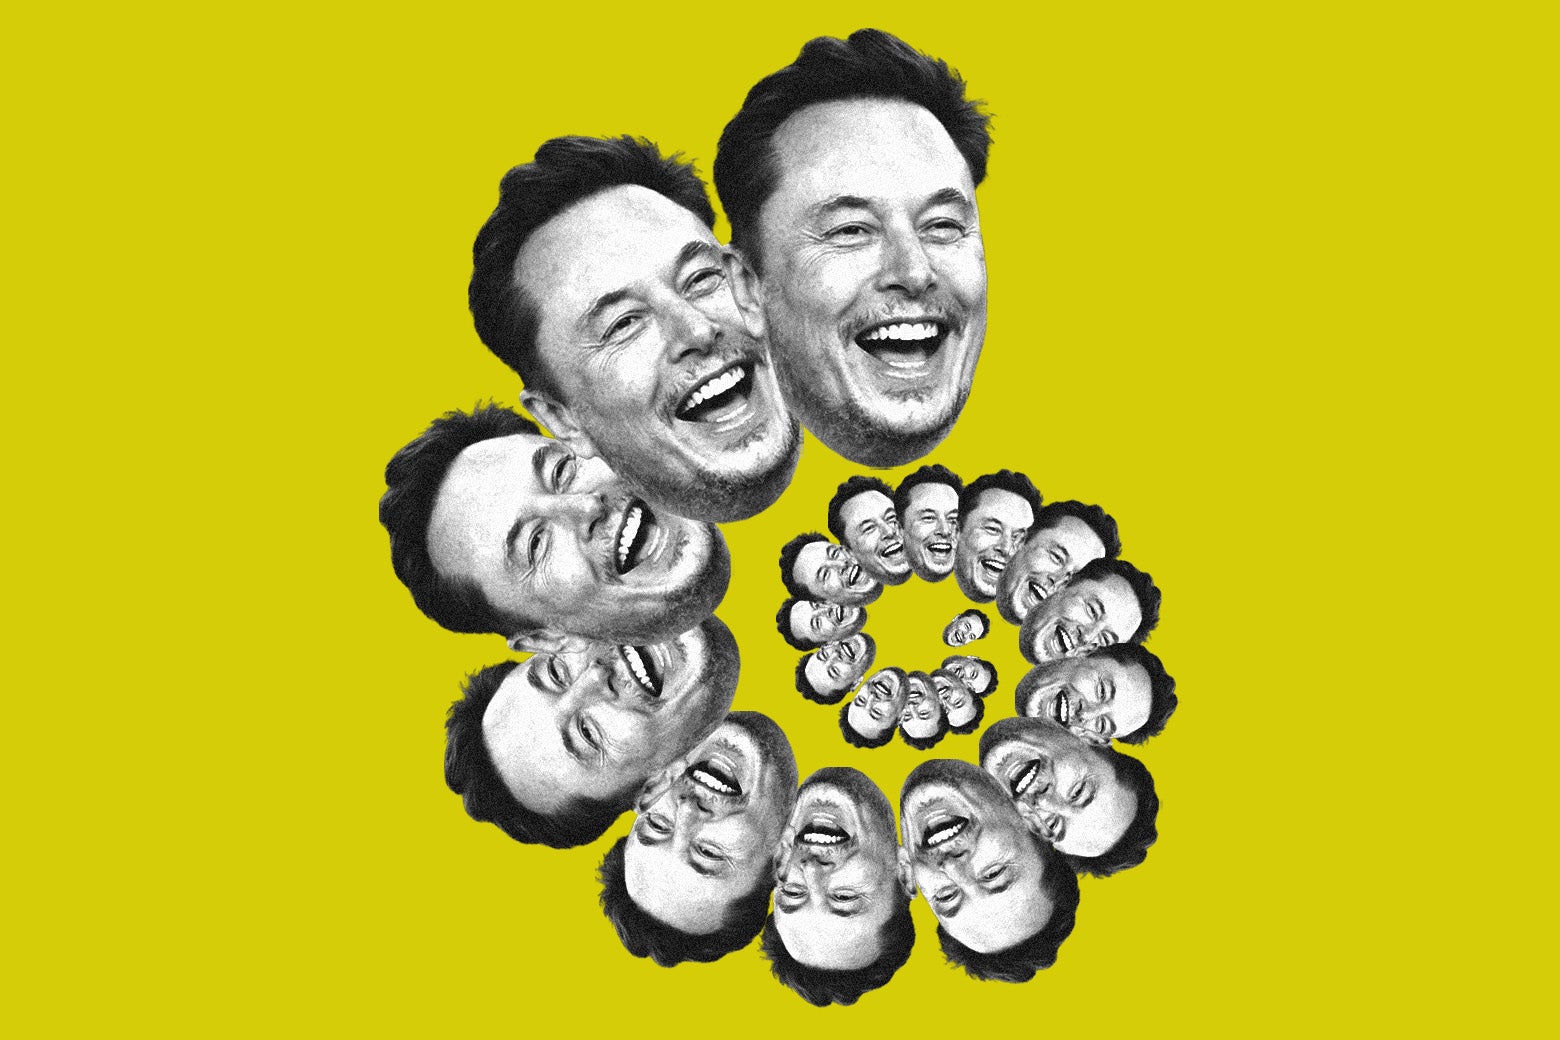 A descending spiral of cackling Elons against a yellow background.